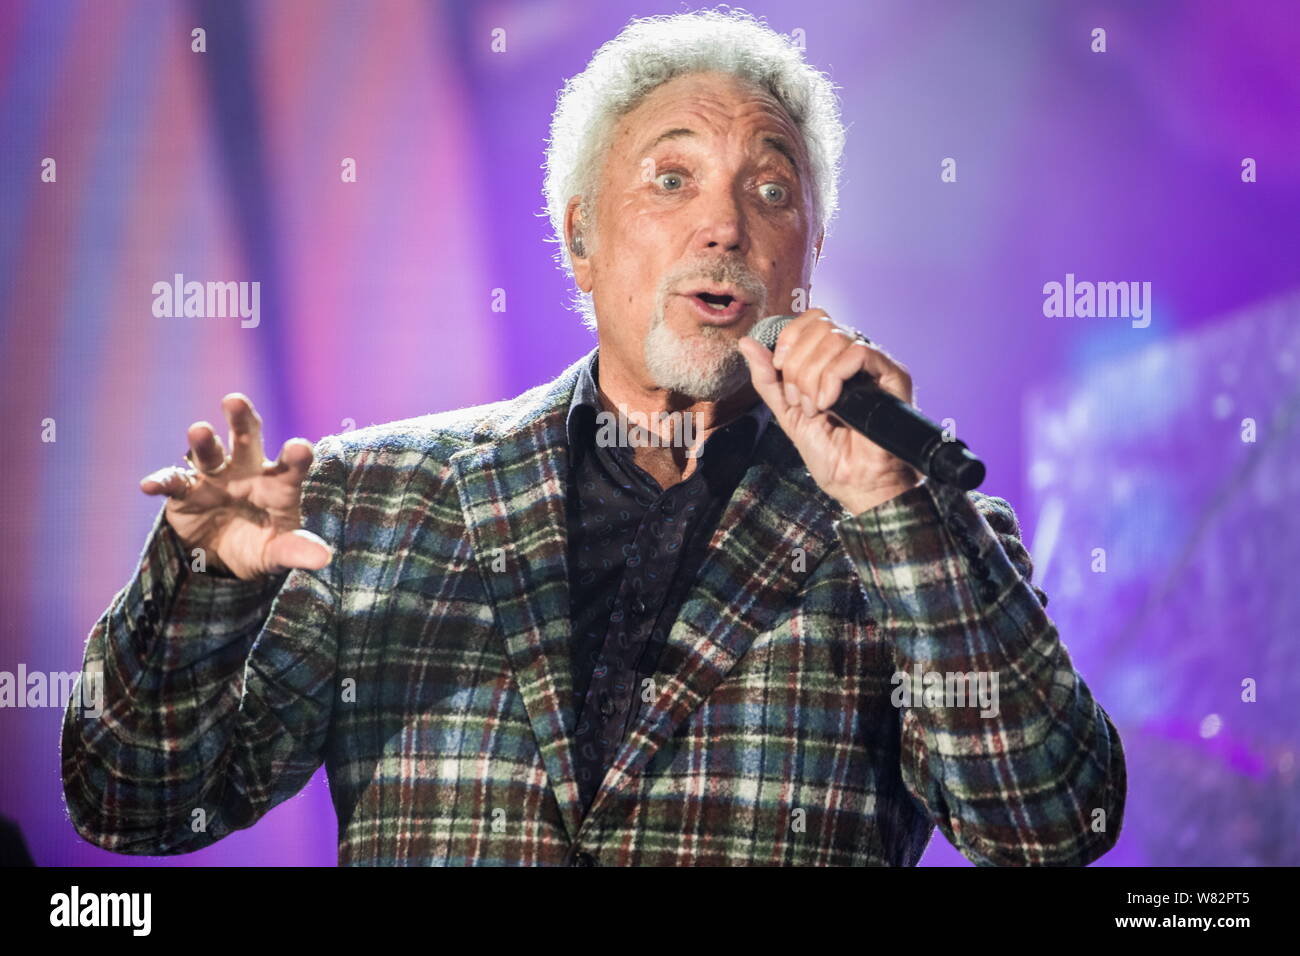 Welsh singer Sir Thomas John Woodward, known by his stage name Tom Jones,  performs during a concert in Hong Kong, China, 25 February 2017 Stock Photo  - Alamy